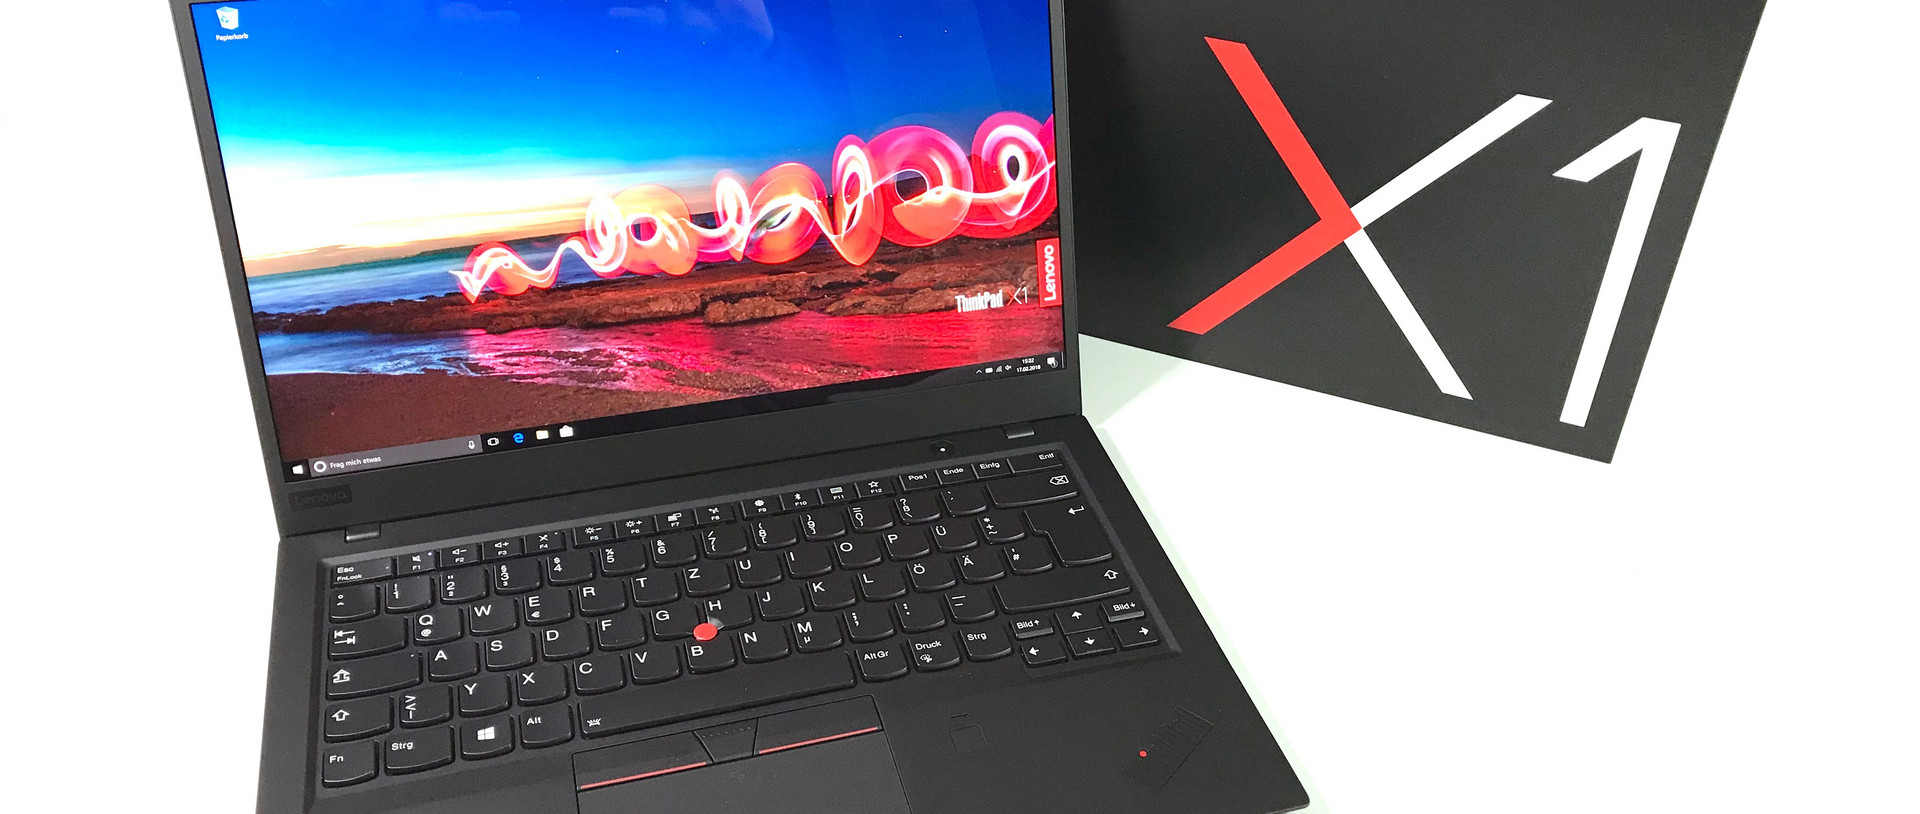 Lenovo ThinkPad X1 Carbon (2018, 2019) - An overview of all